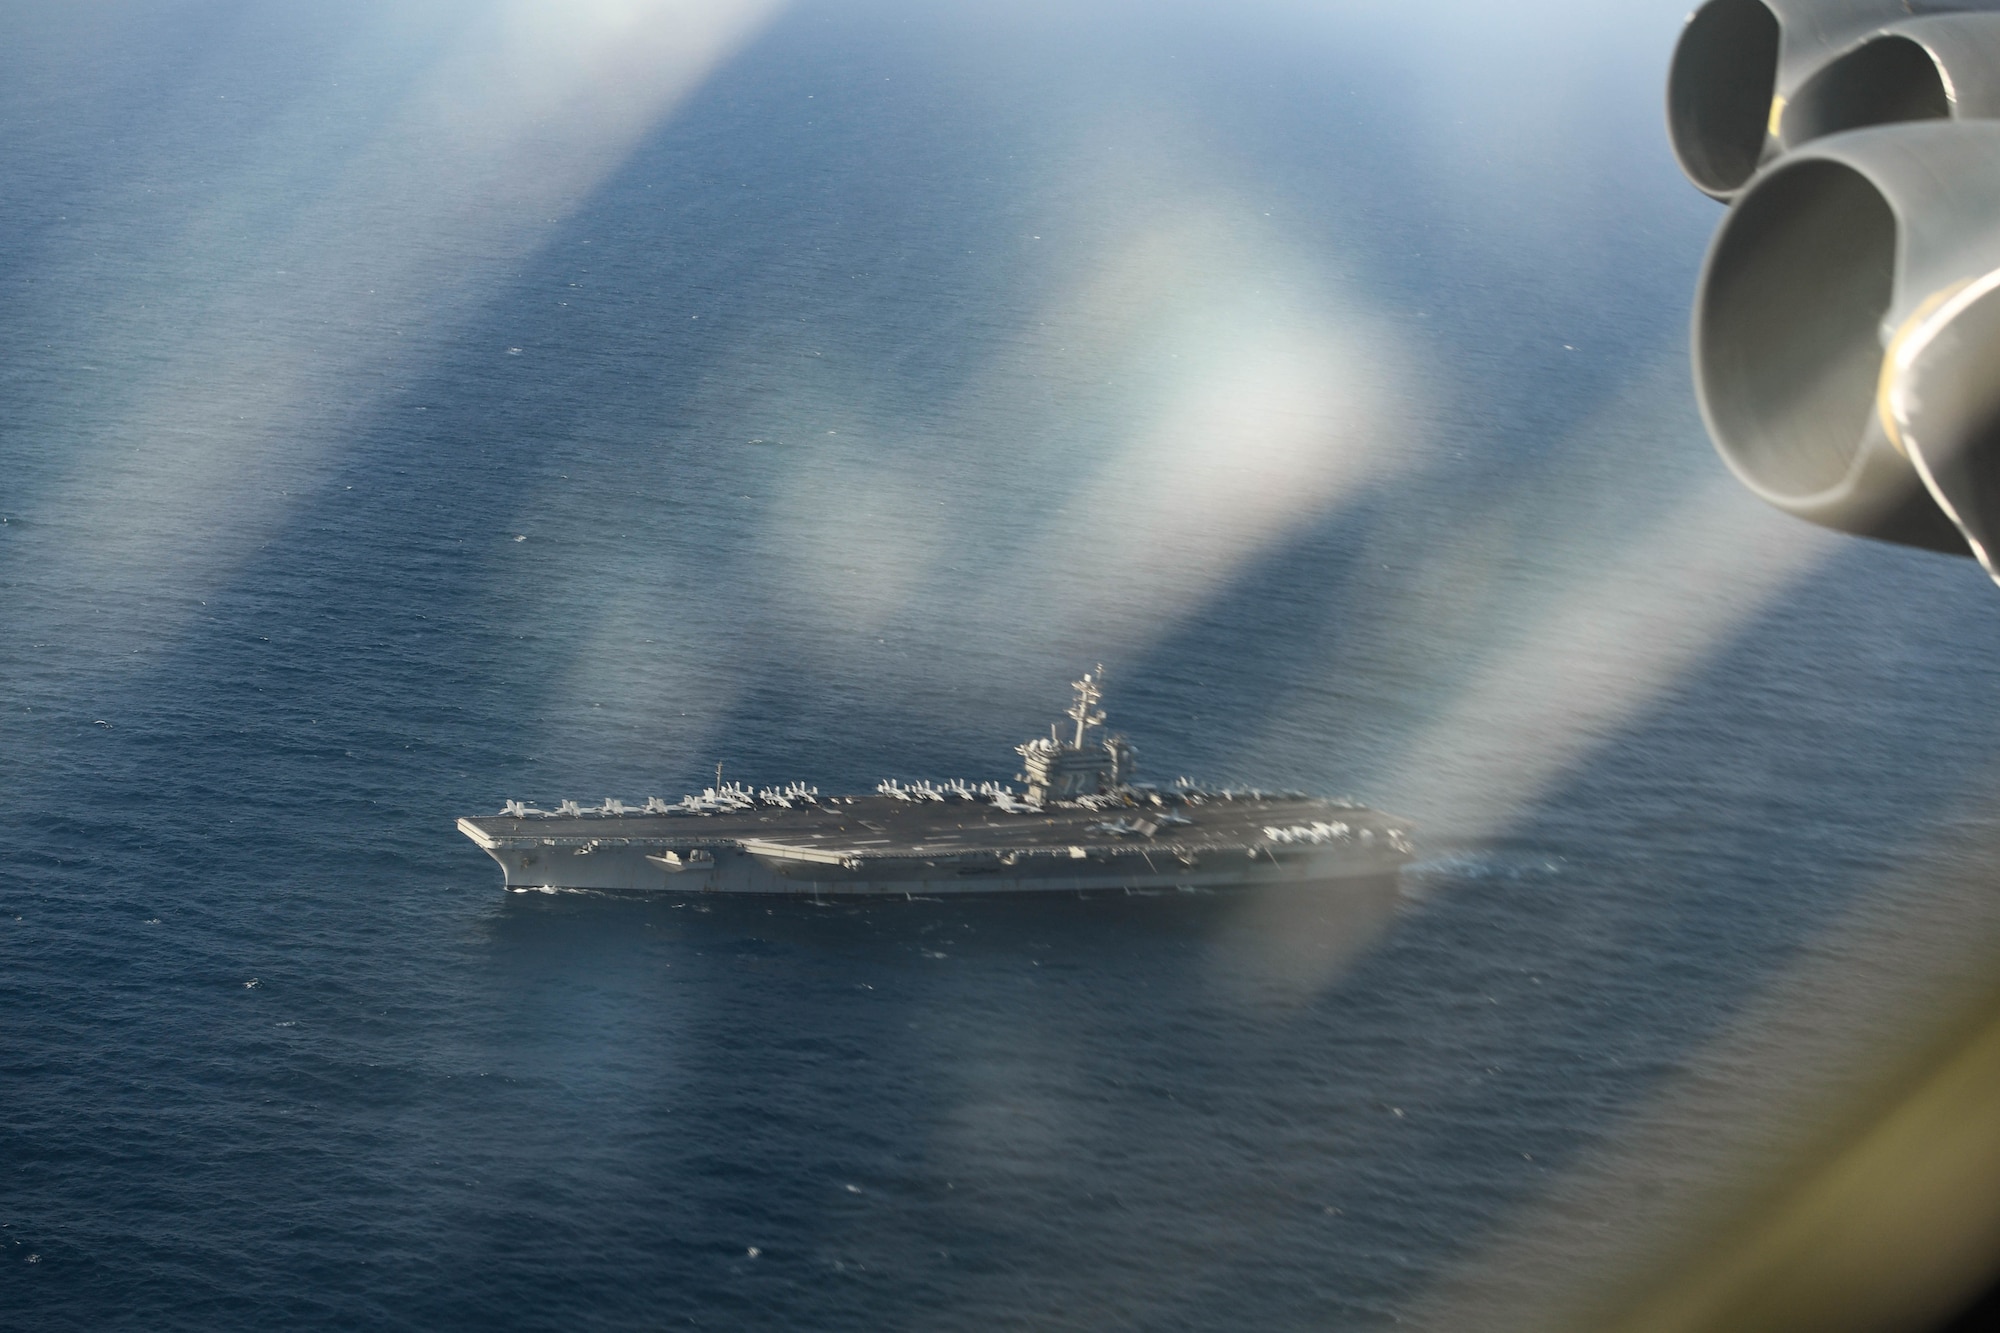 A photo of USS Abraham Lincoln taken from a B-52 in air.